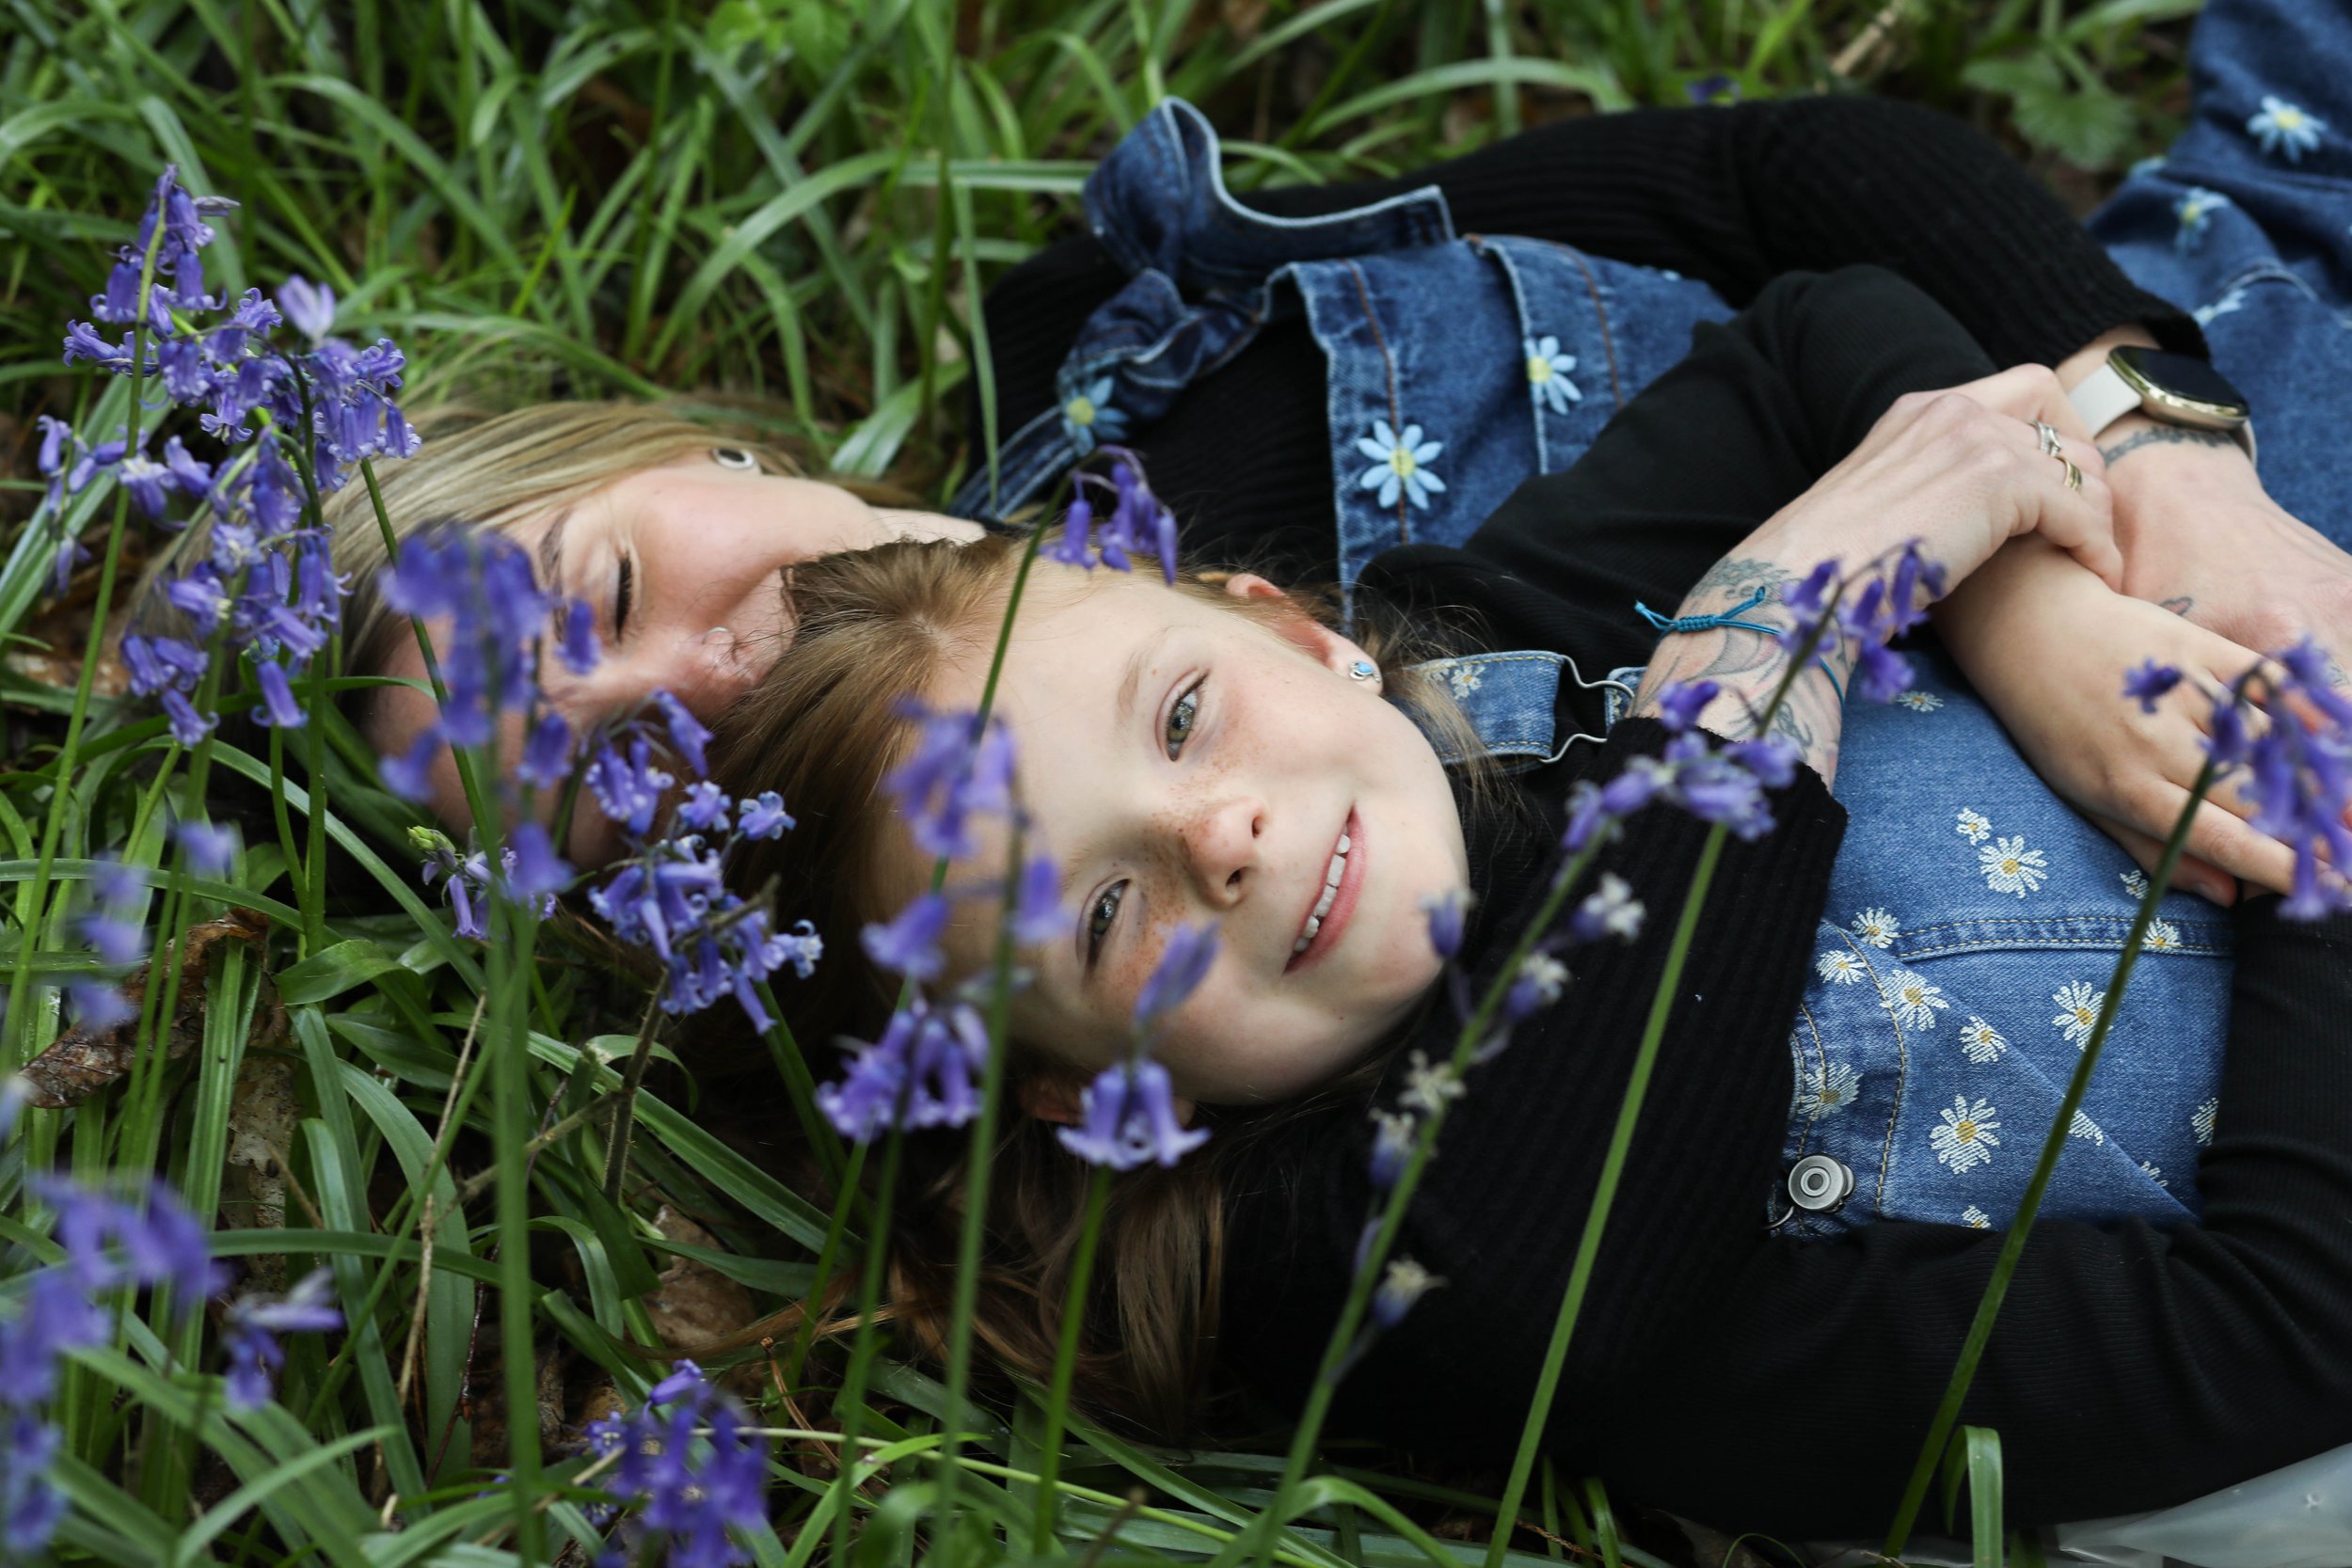 MUM AND DAUGHTER PHOTO SHOOT IN THE BLUEBELLS | BERKSHIRE PORTRAIT SHOOTS53 choice .JPG